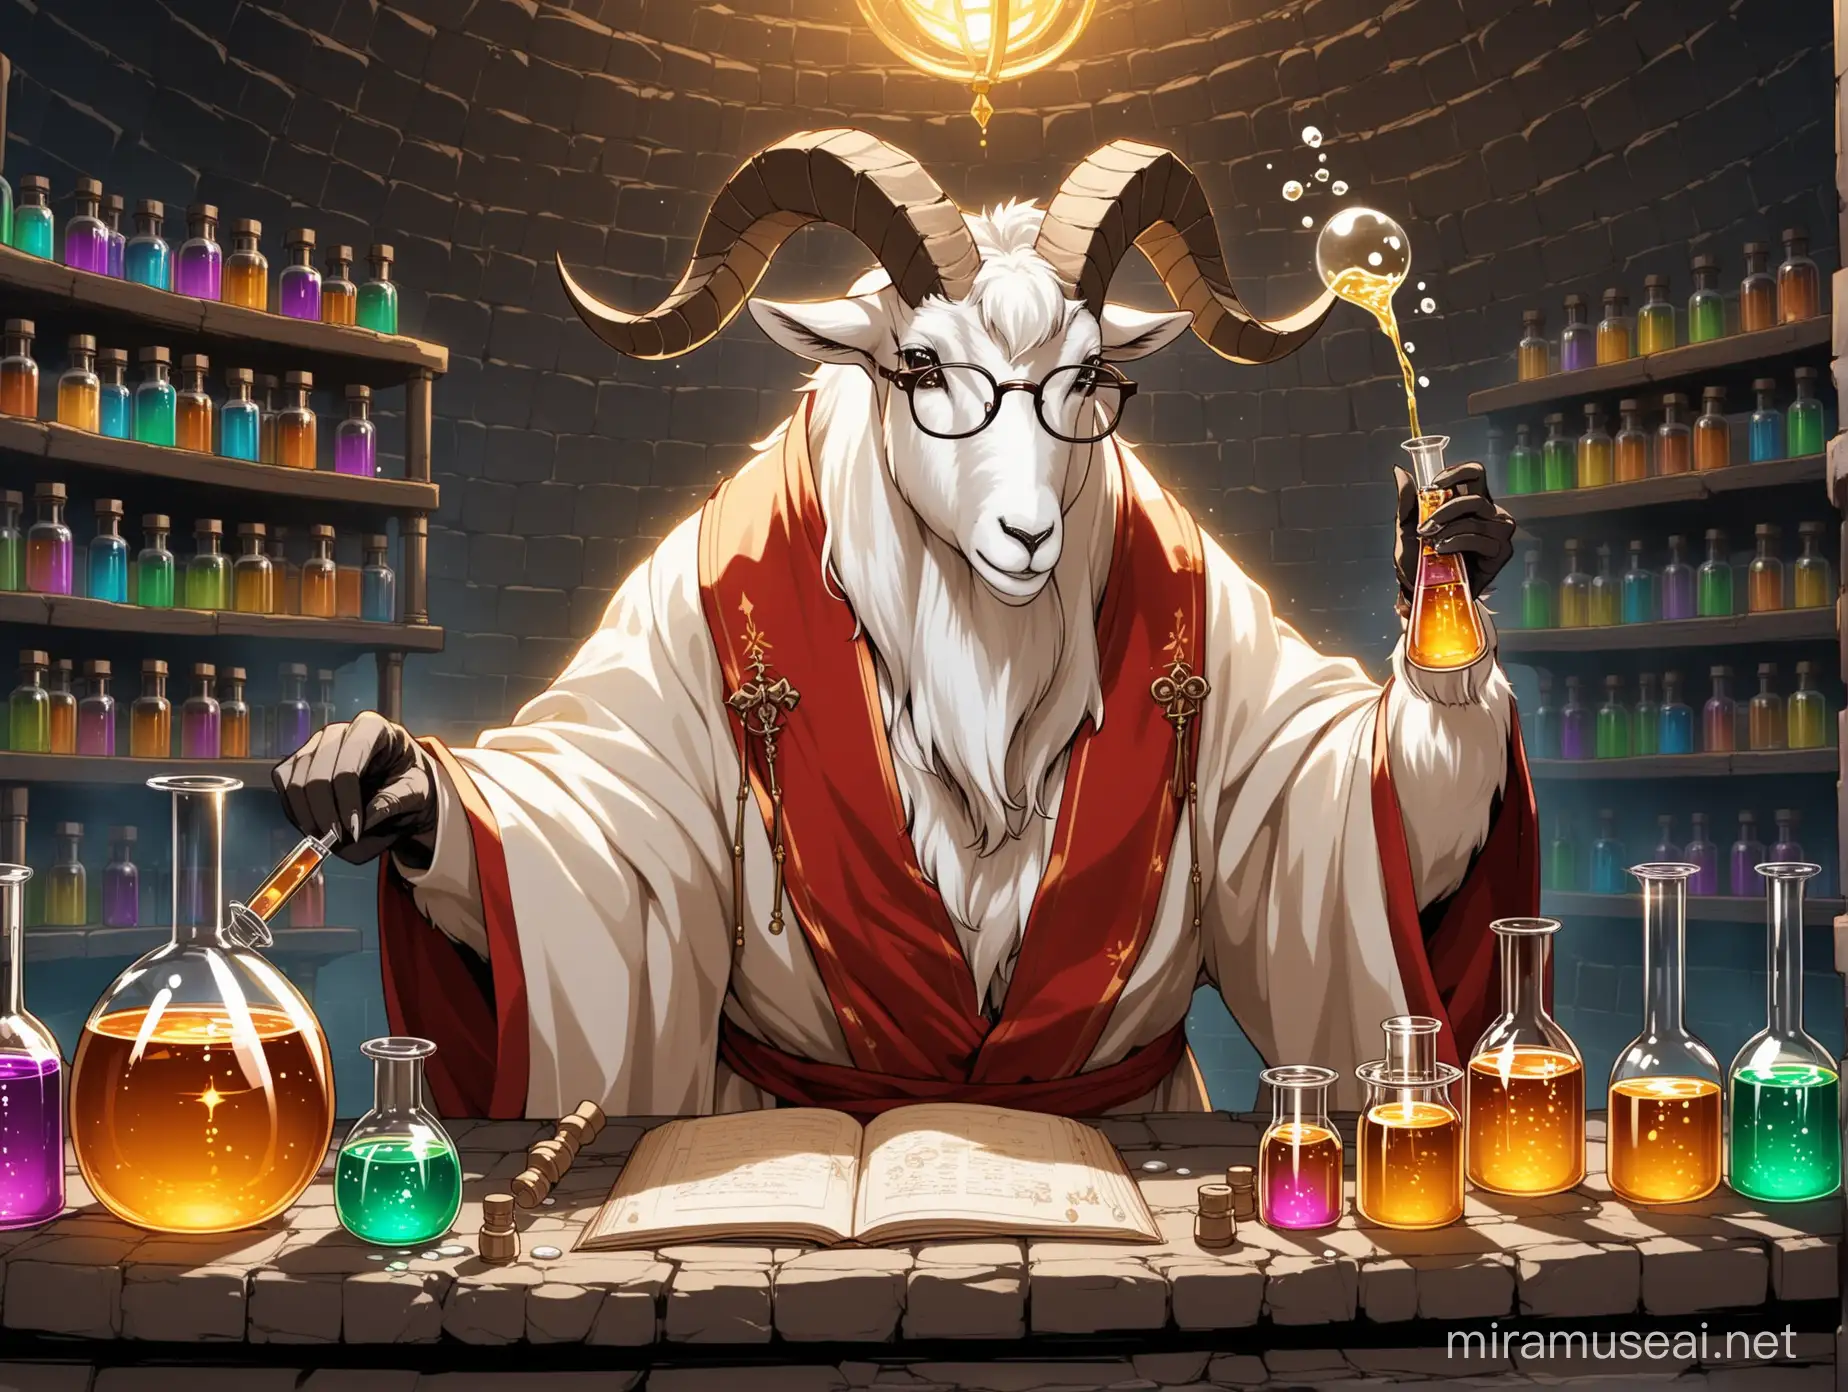 the wise mountain goat is dressed in classical robes and spectacles and is carefully mixing two bubbling vials together in the alchemy lab of the dim dungeon